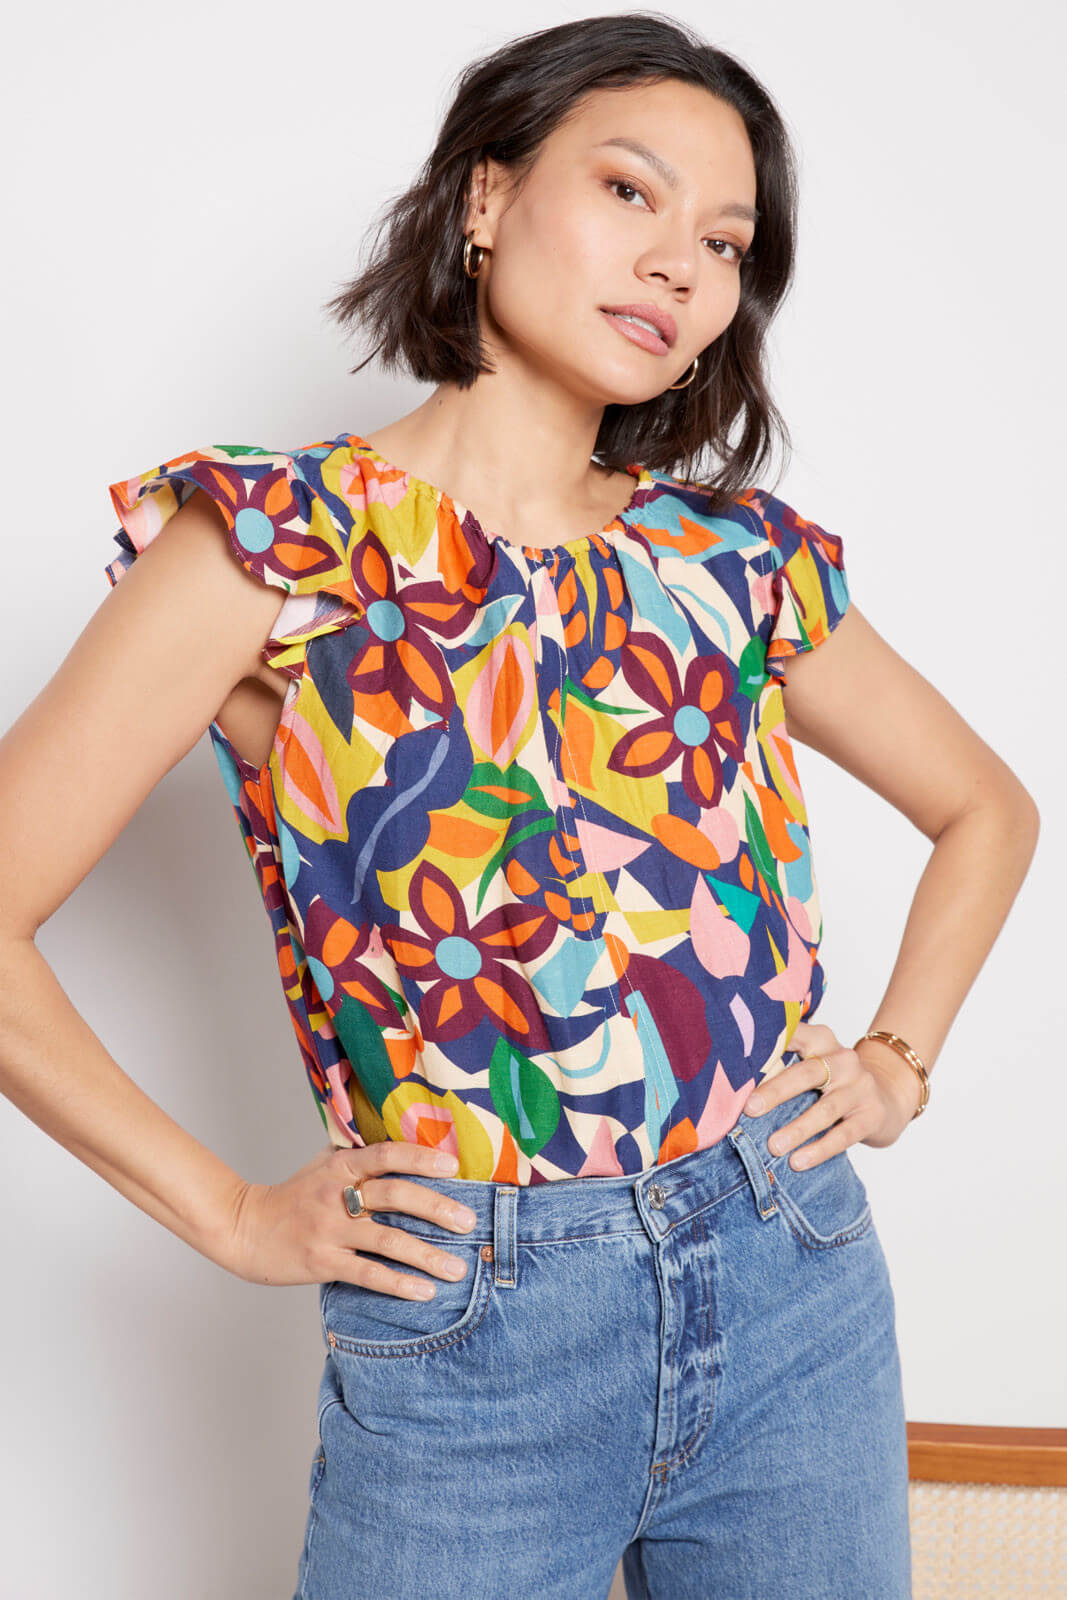 Model in colorful floral blouse and denim jeans.